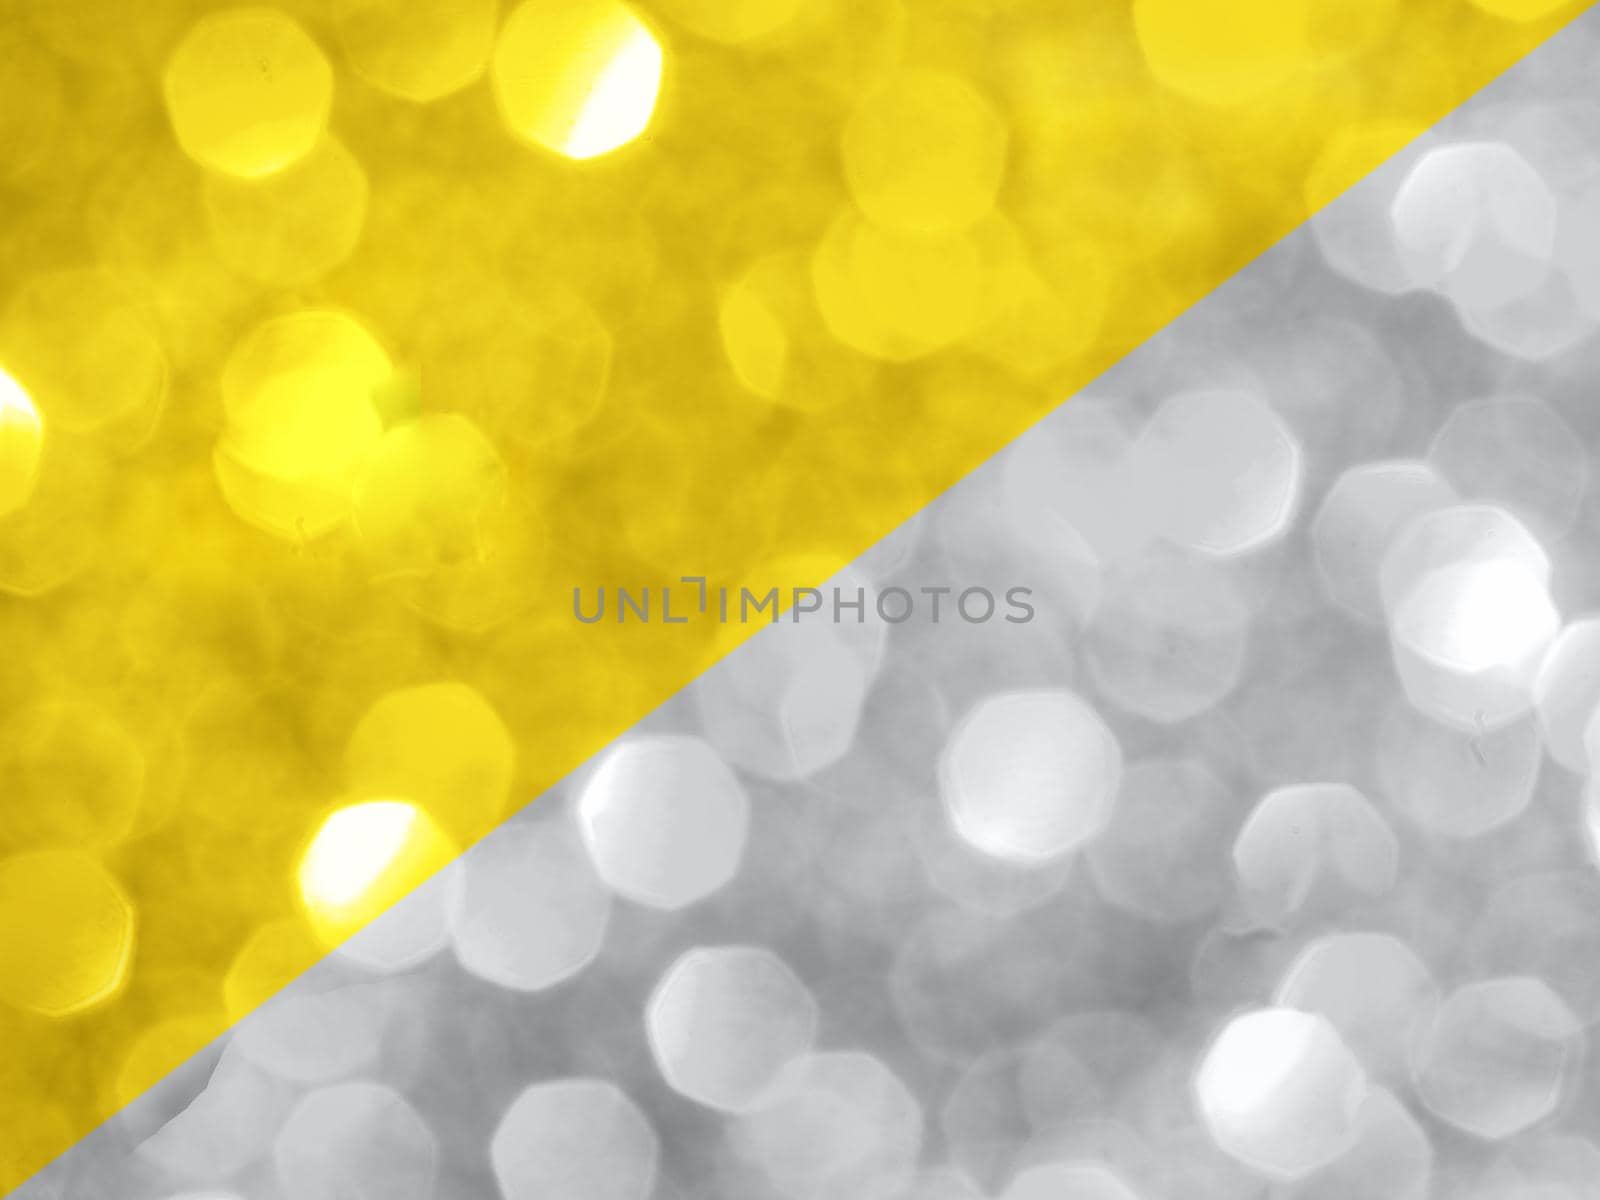 Sparkling background made of yellow and gray colors. Colors of year 2021 blurred backdrop for holidays and parties. Copy space